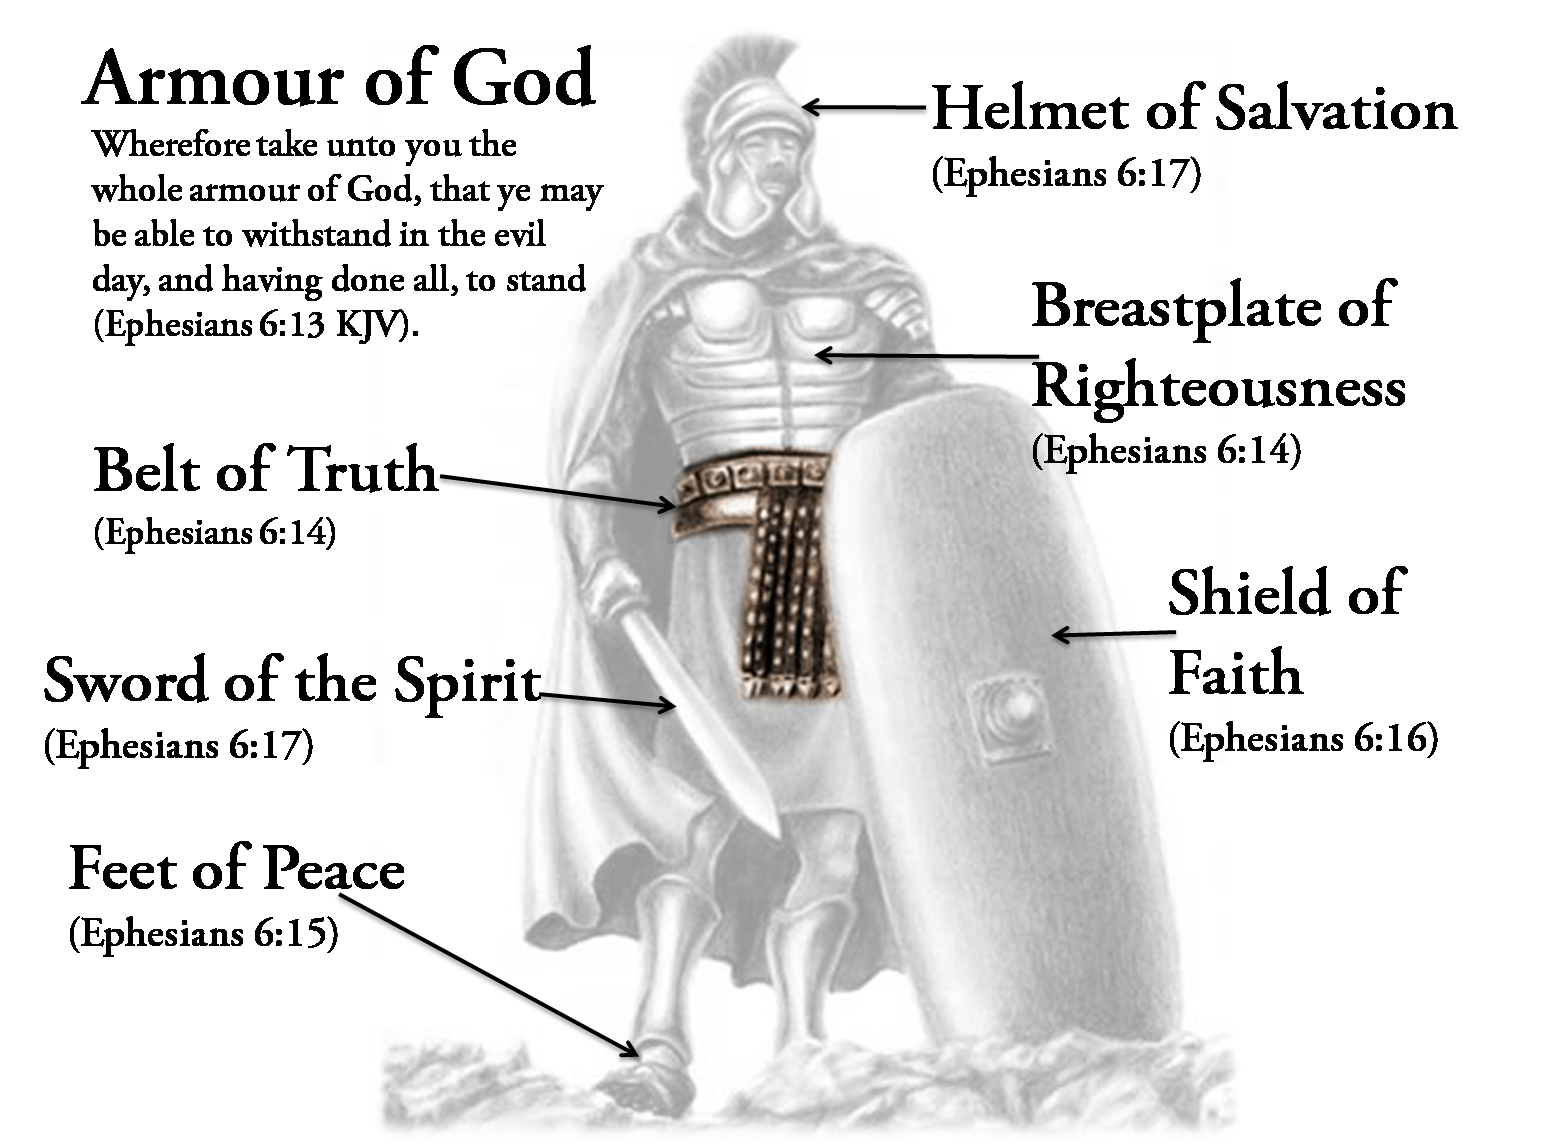 Whole Armour Of God Symbolically Representing How We Must Arm